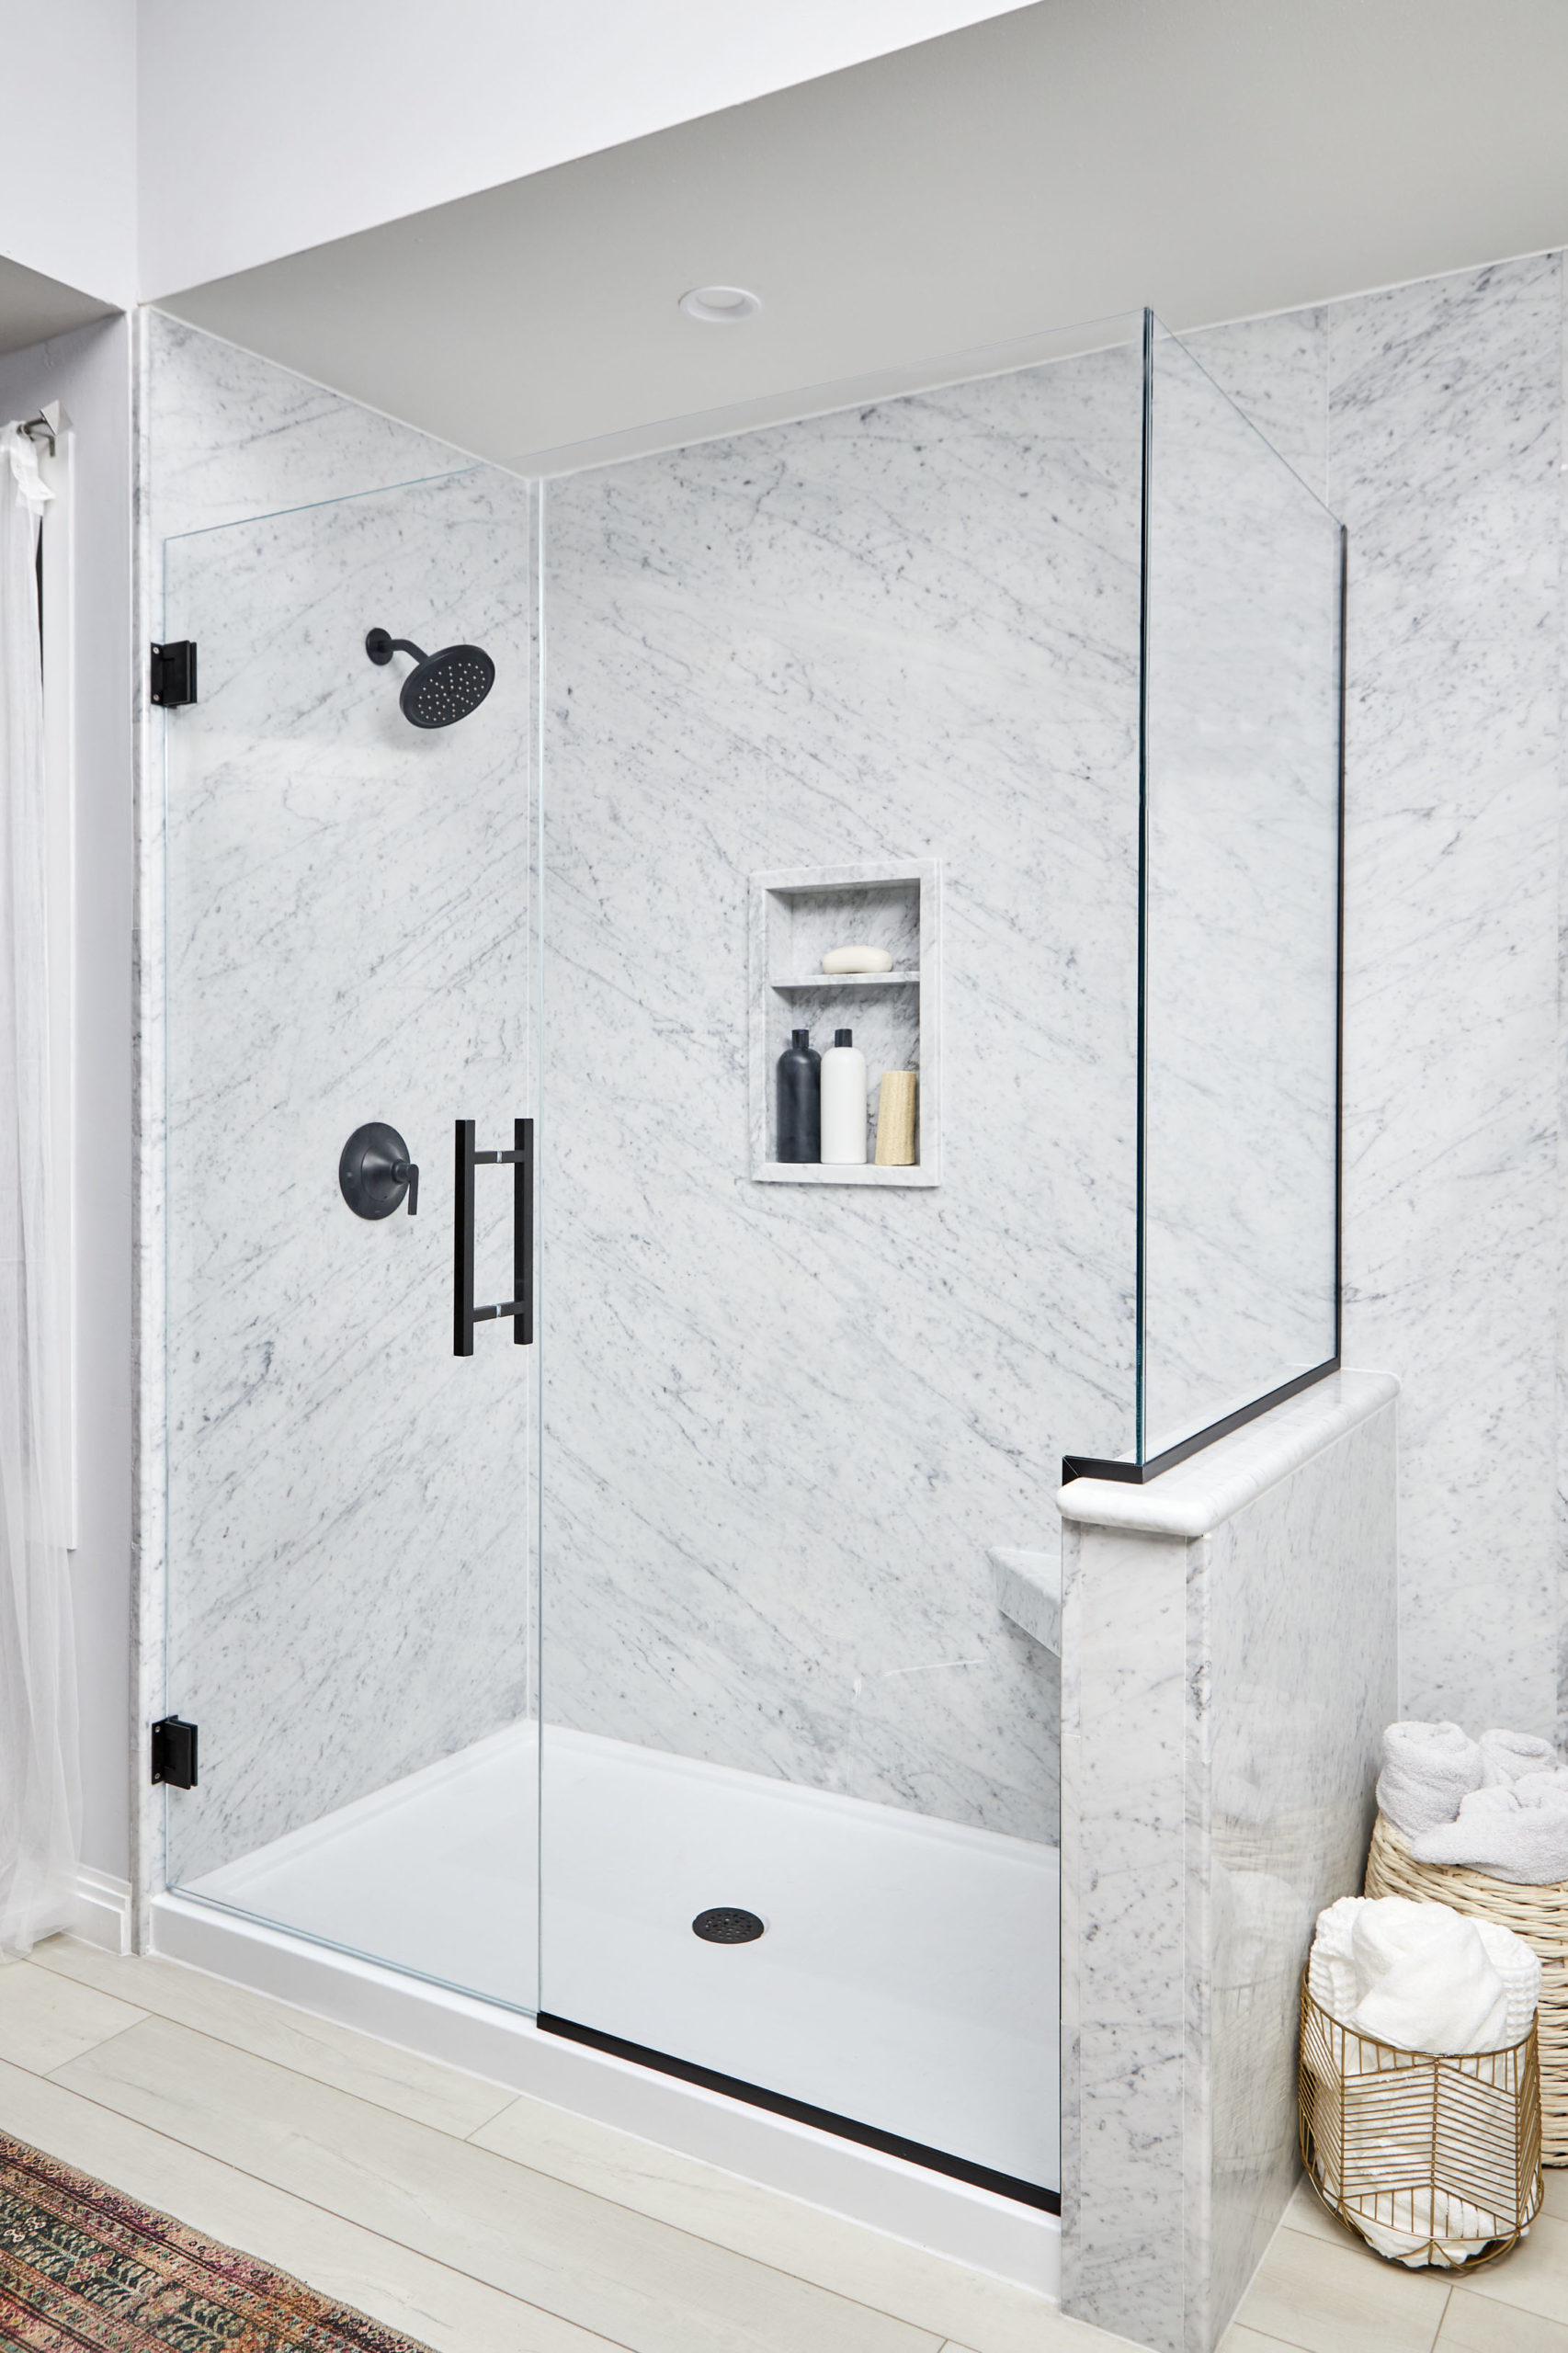 Can You Convert a Stand-Up Shower to a Tub?